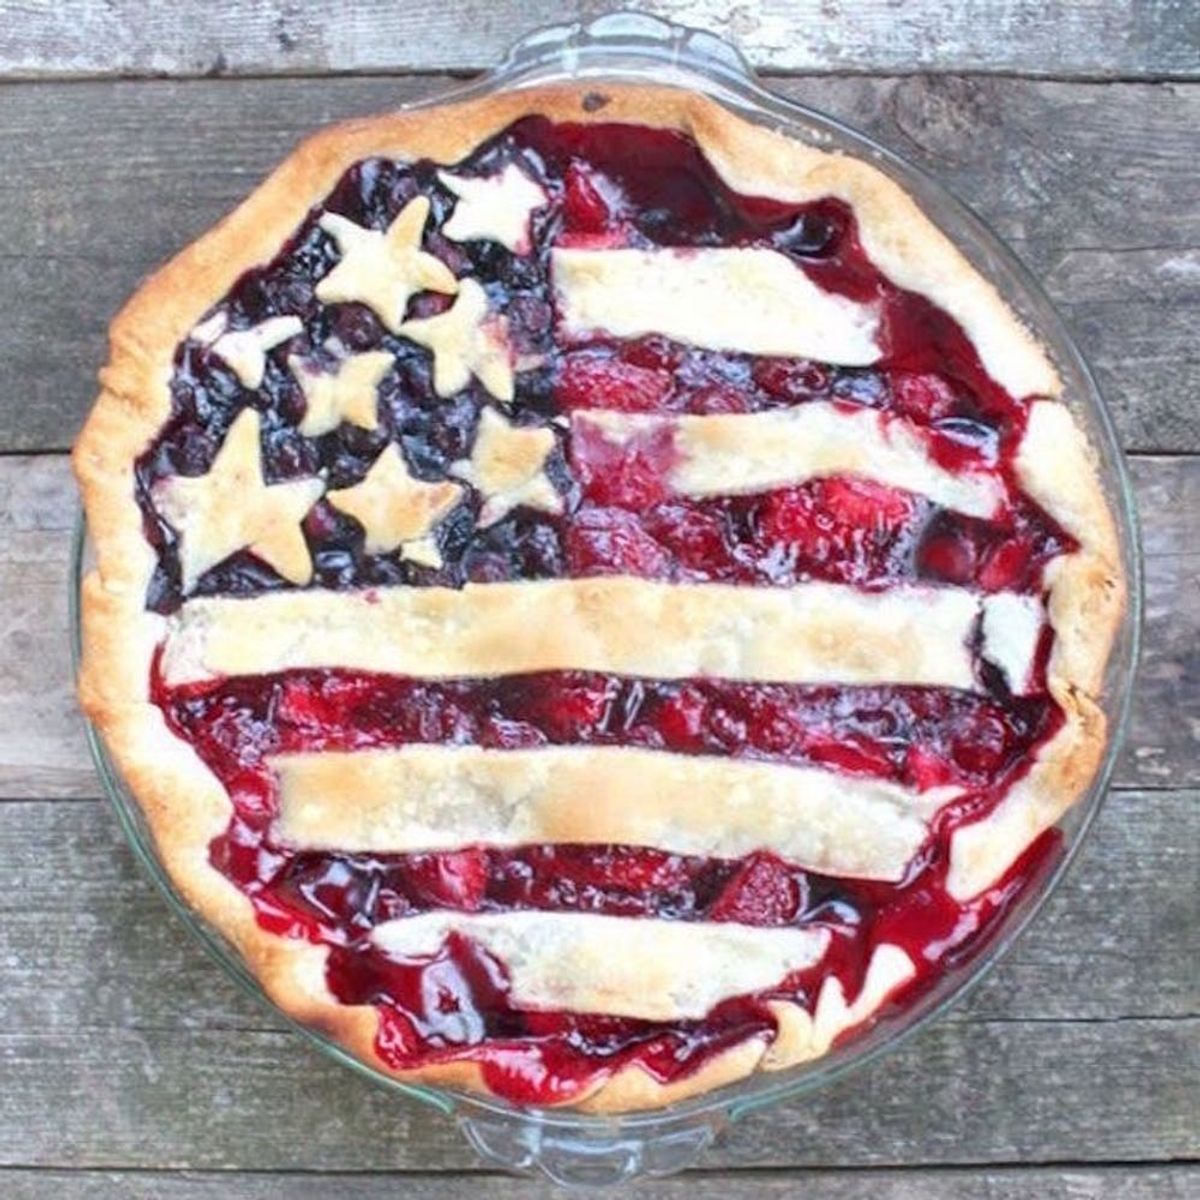 16 Flag Foods for Your 4th of July Party